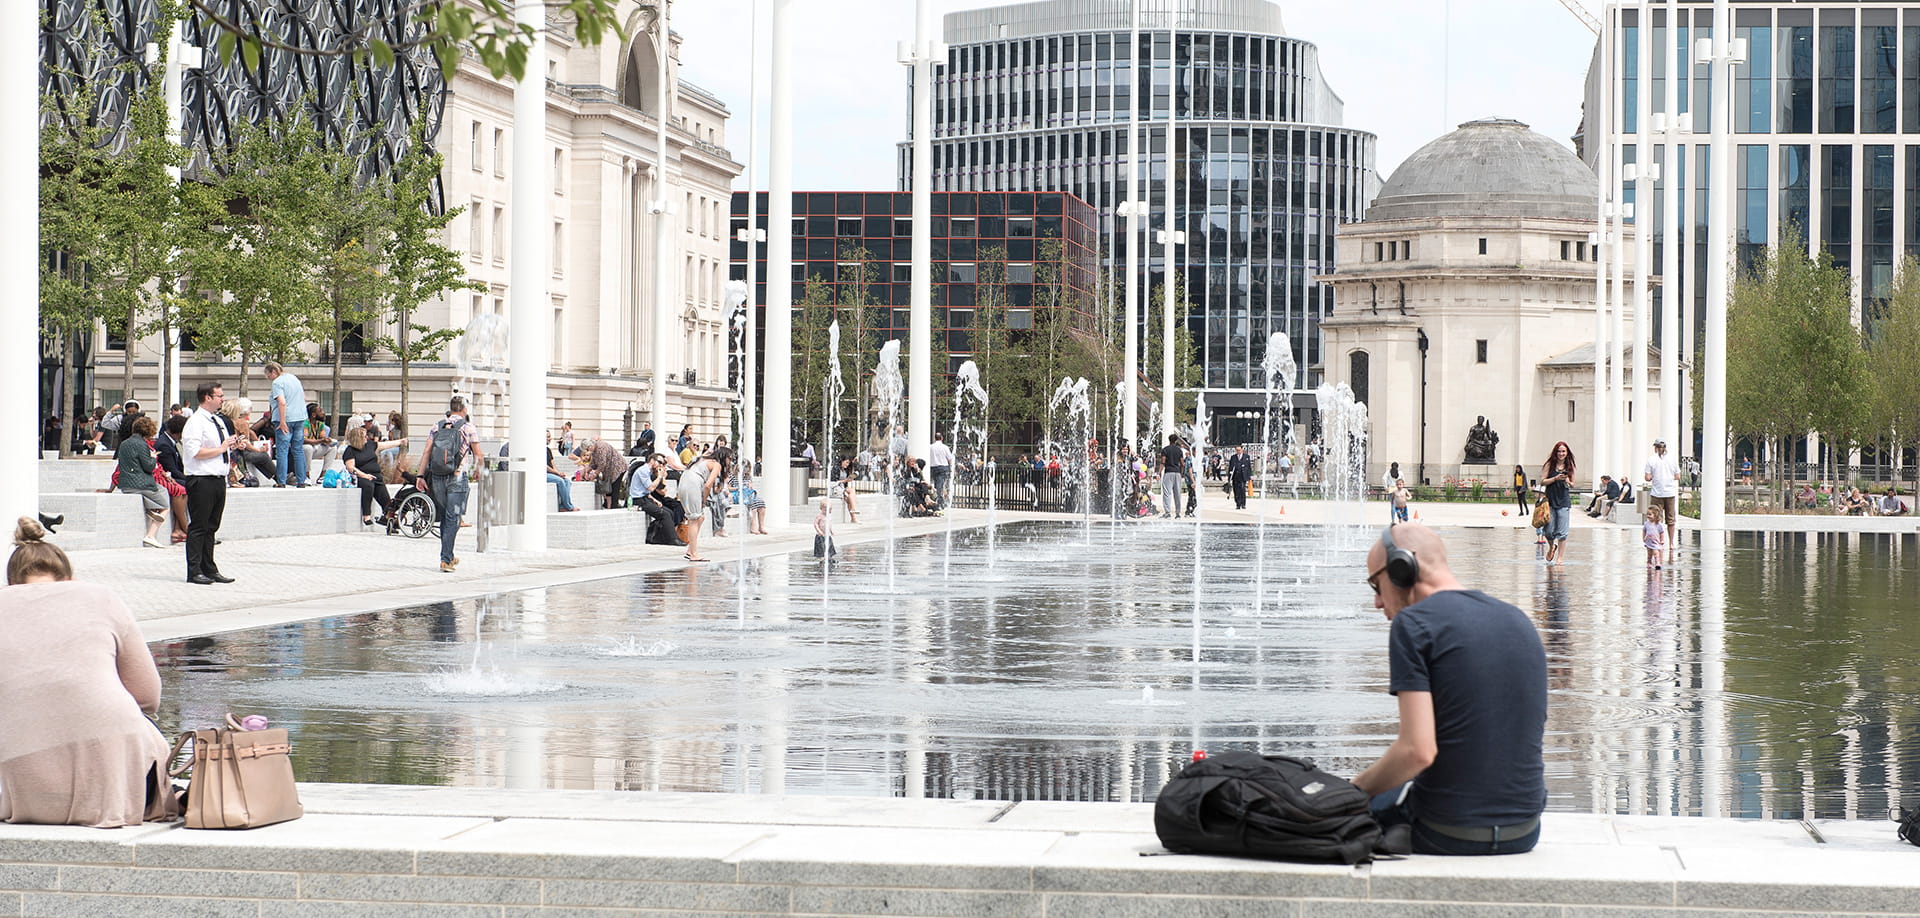 People gathered by the fountains at Centenary Square in Birmingham